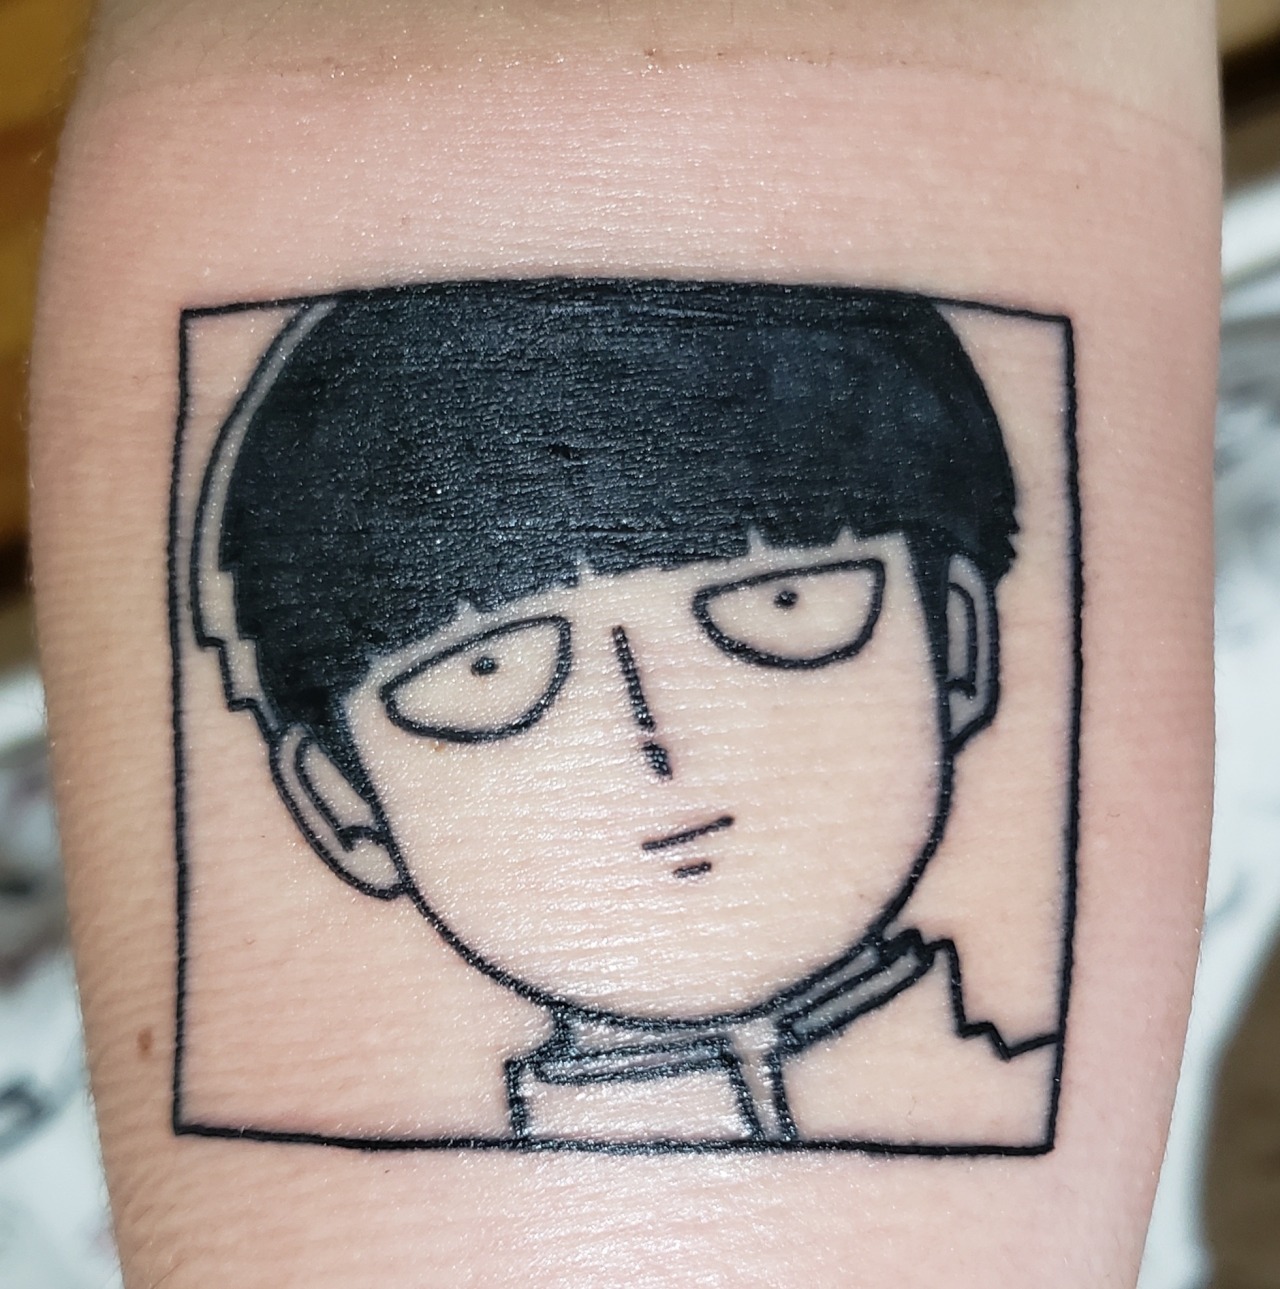 Mob Psycho 100 Tattoo Brings Out A Supernatural Blowout